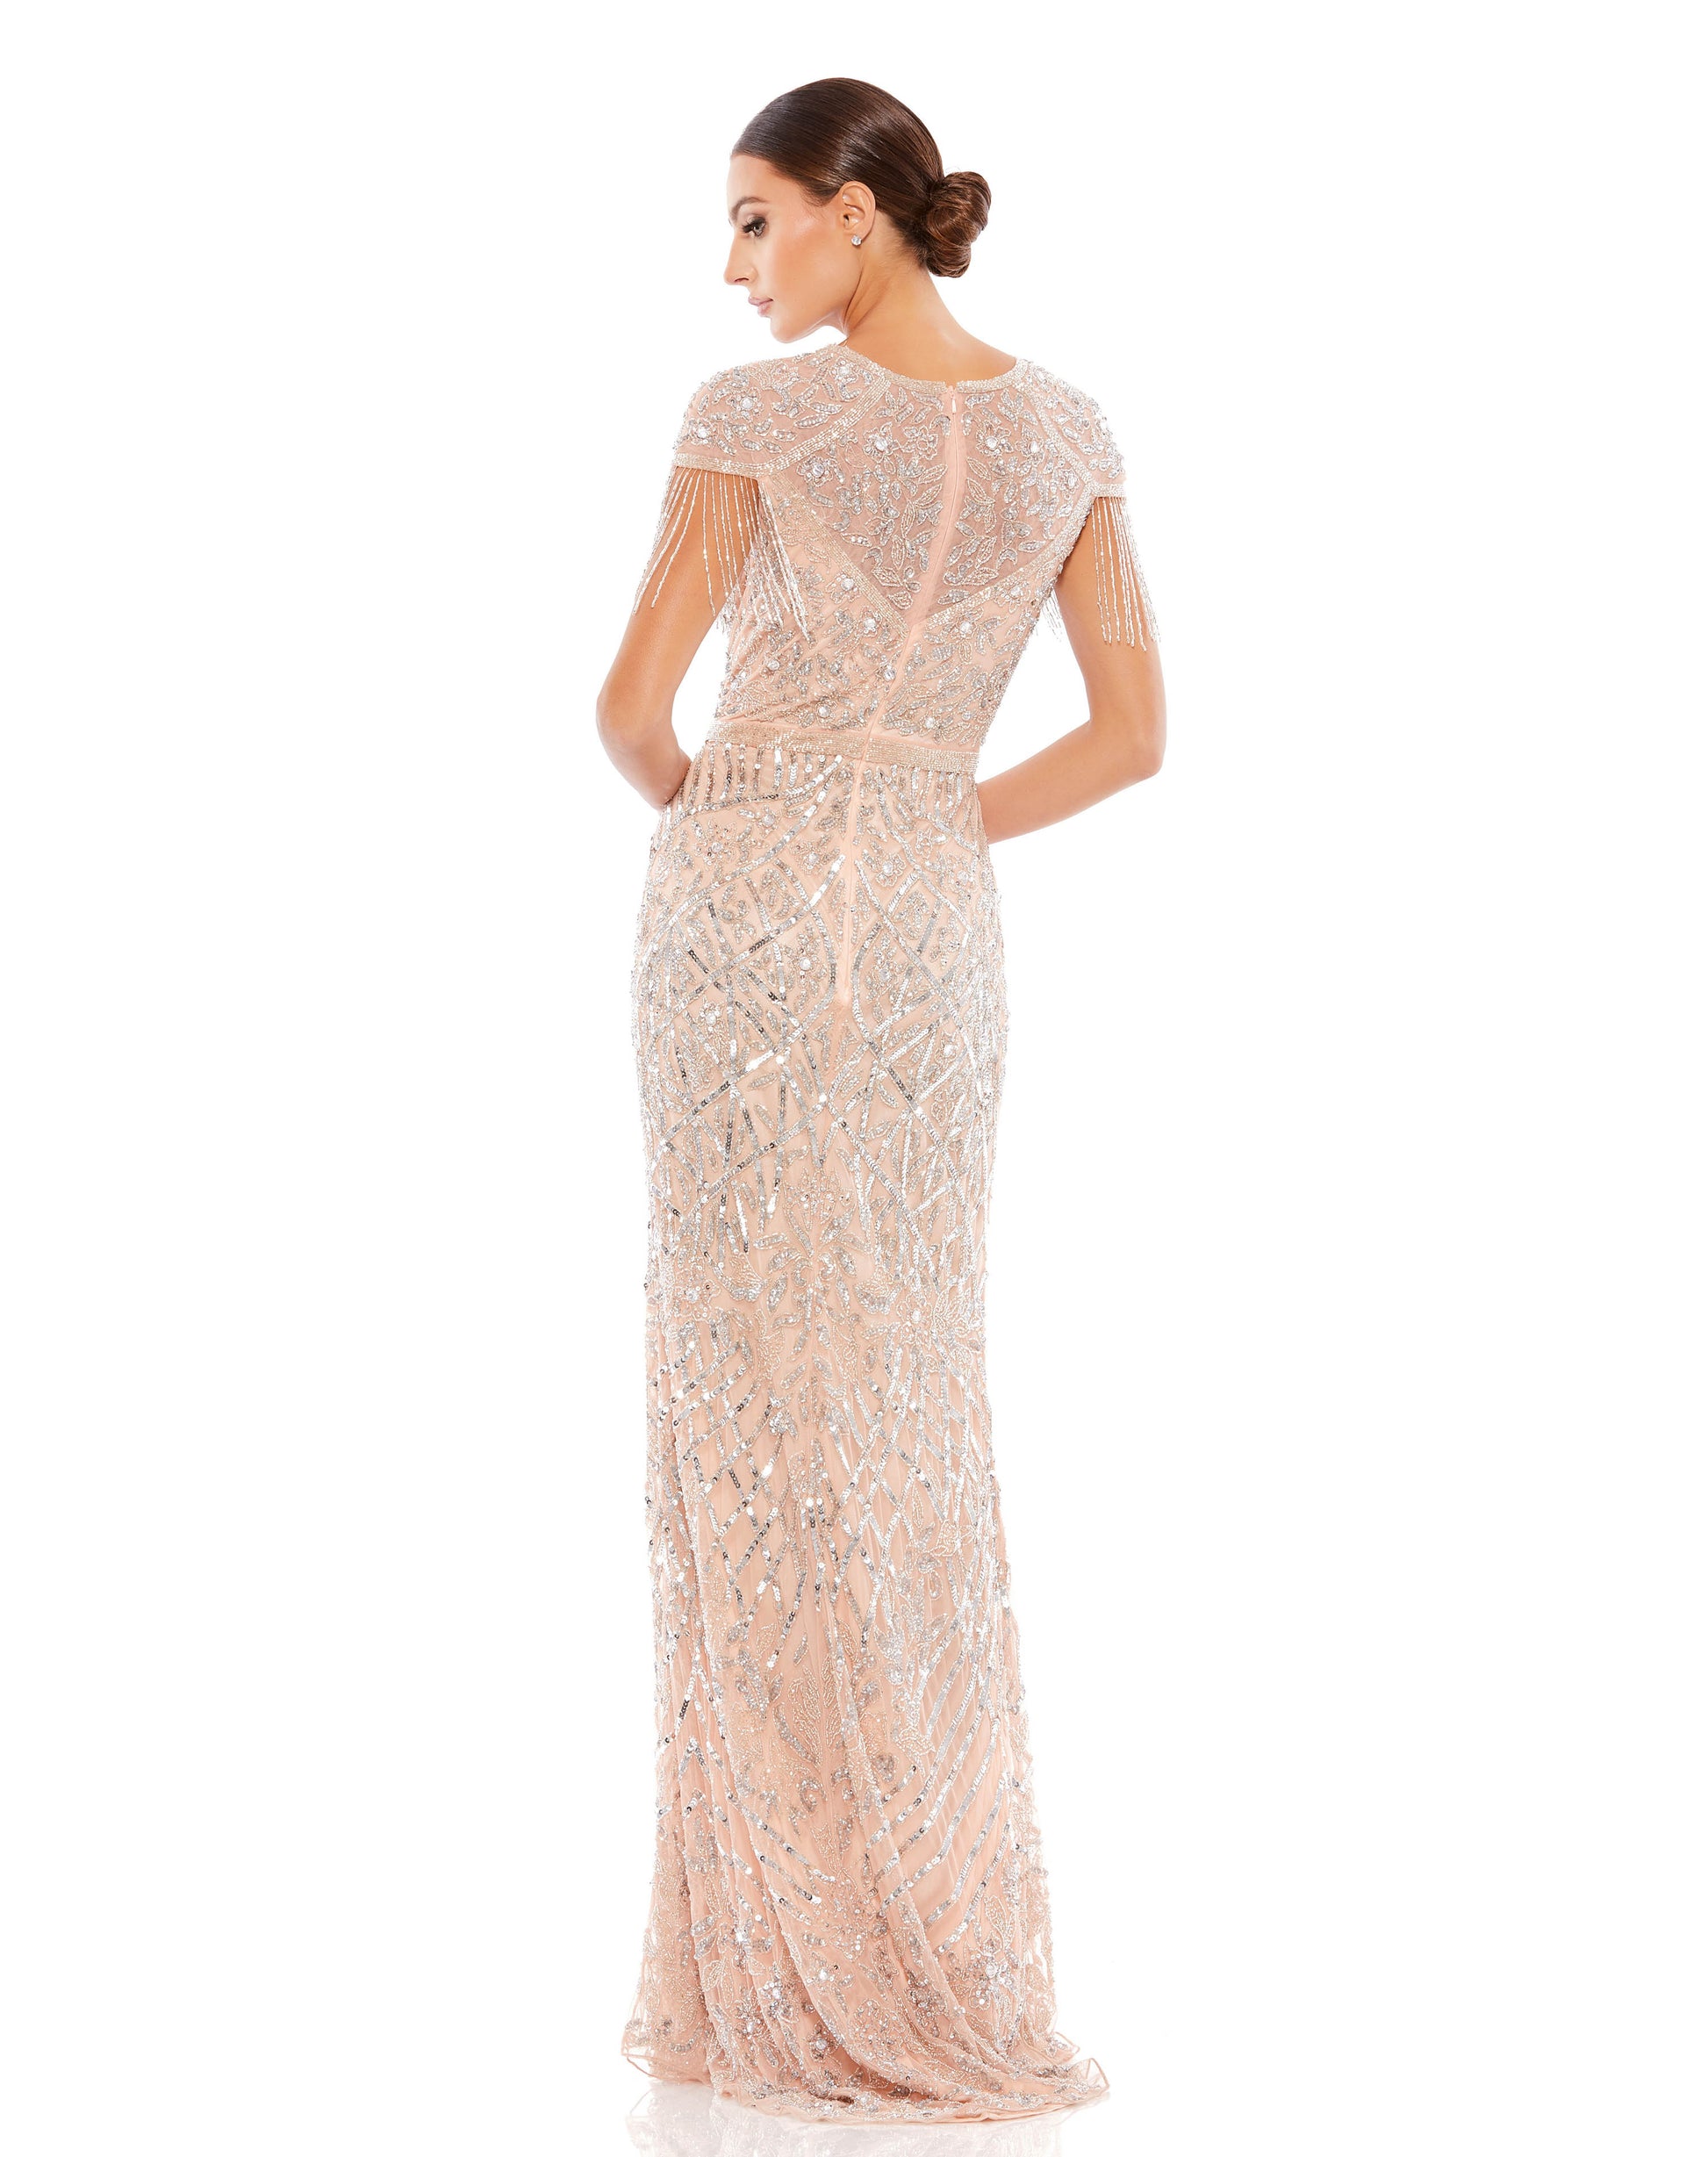 Fully-embellished hand-beaded column gown with semi-sheer mesh yoke and shoulders, beautiful beaded fringe, and a beaded belt at the natural waist. Mac Duggal Back Zipper 100% Polyester Full Length Cap Sleeve High Neck Style #4715